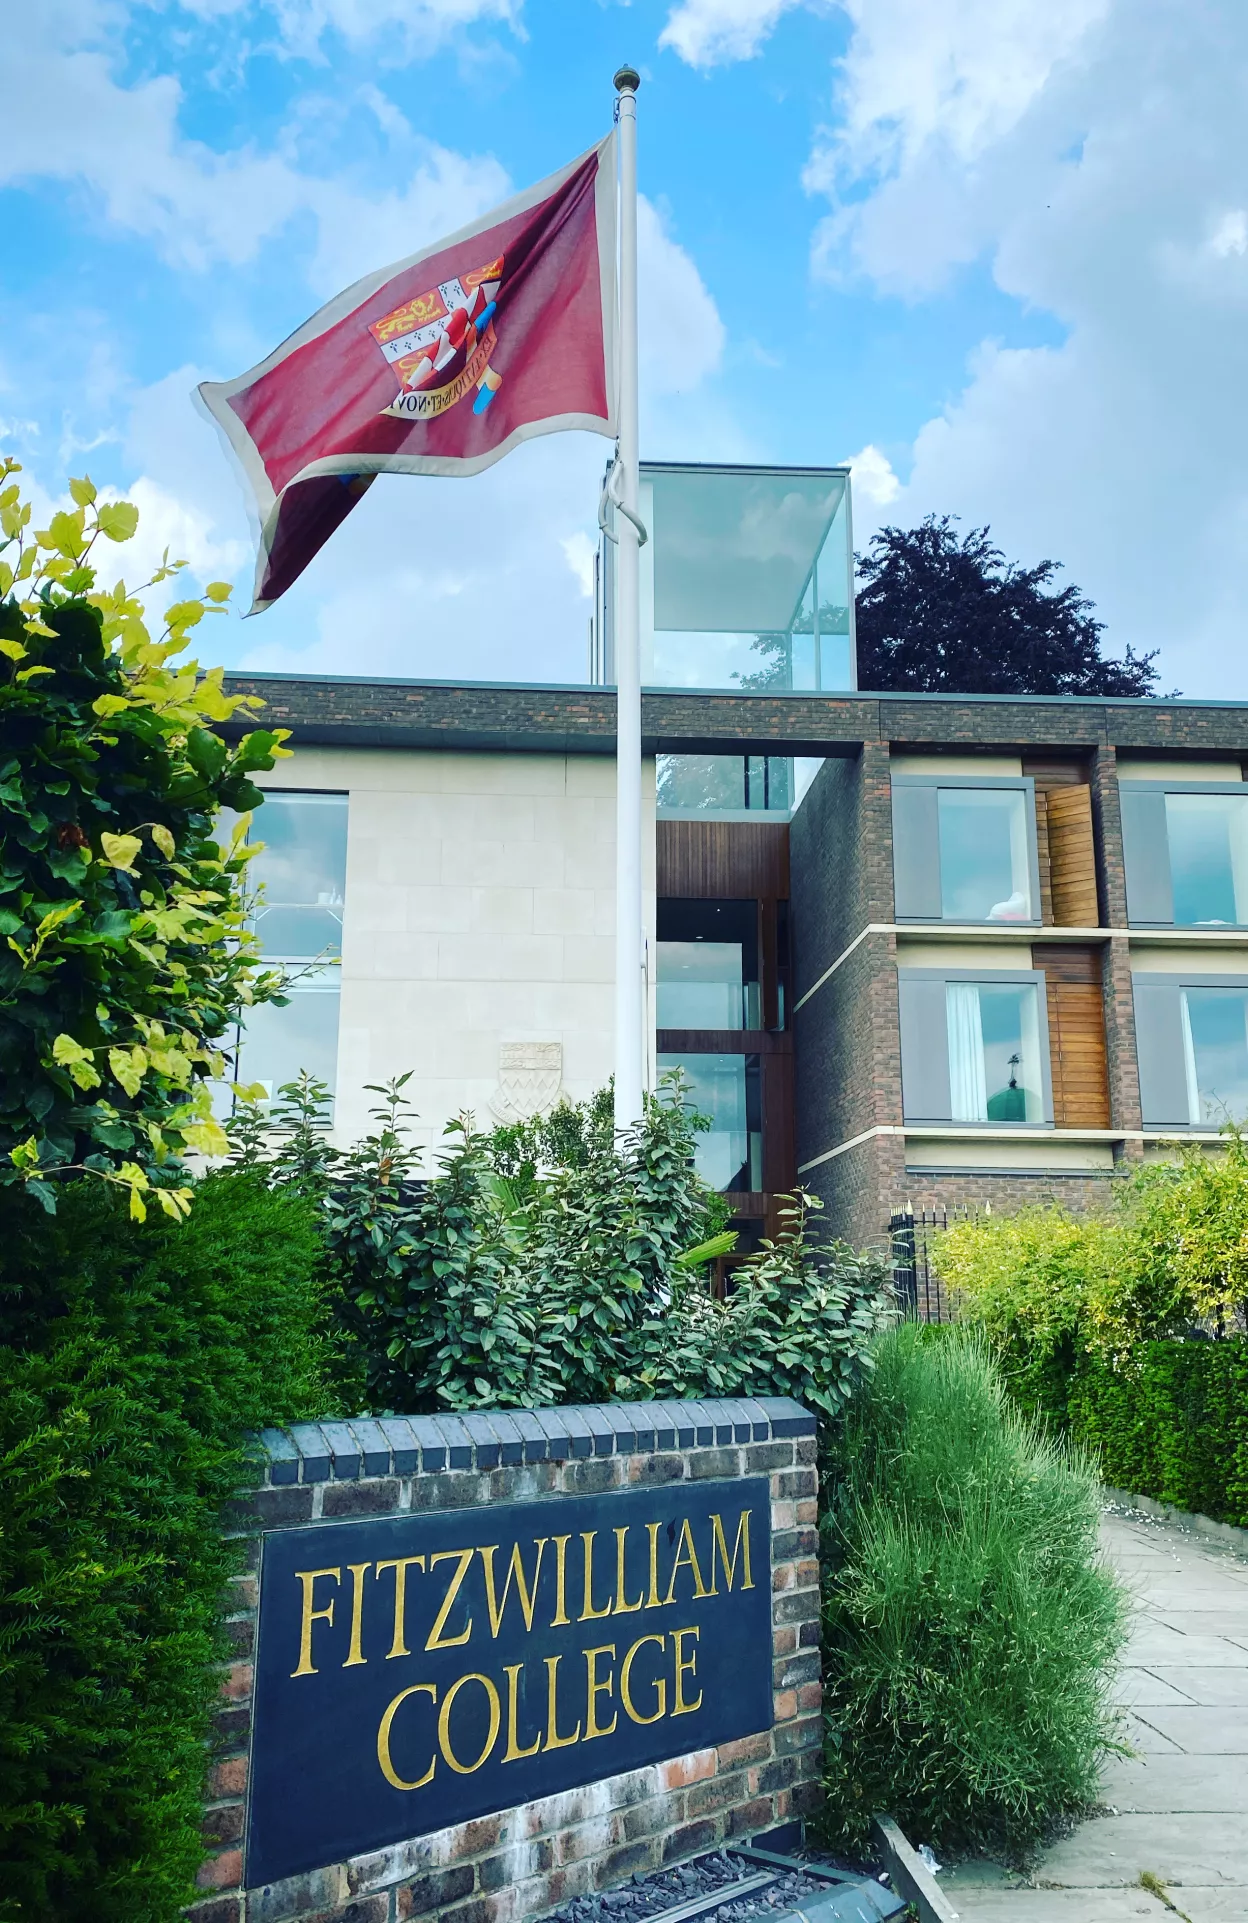 Gatehouse and college flag